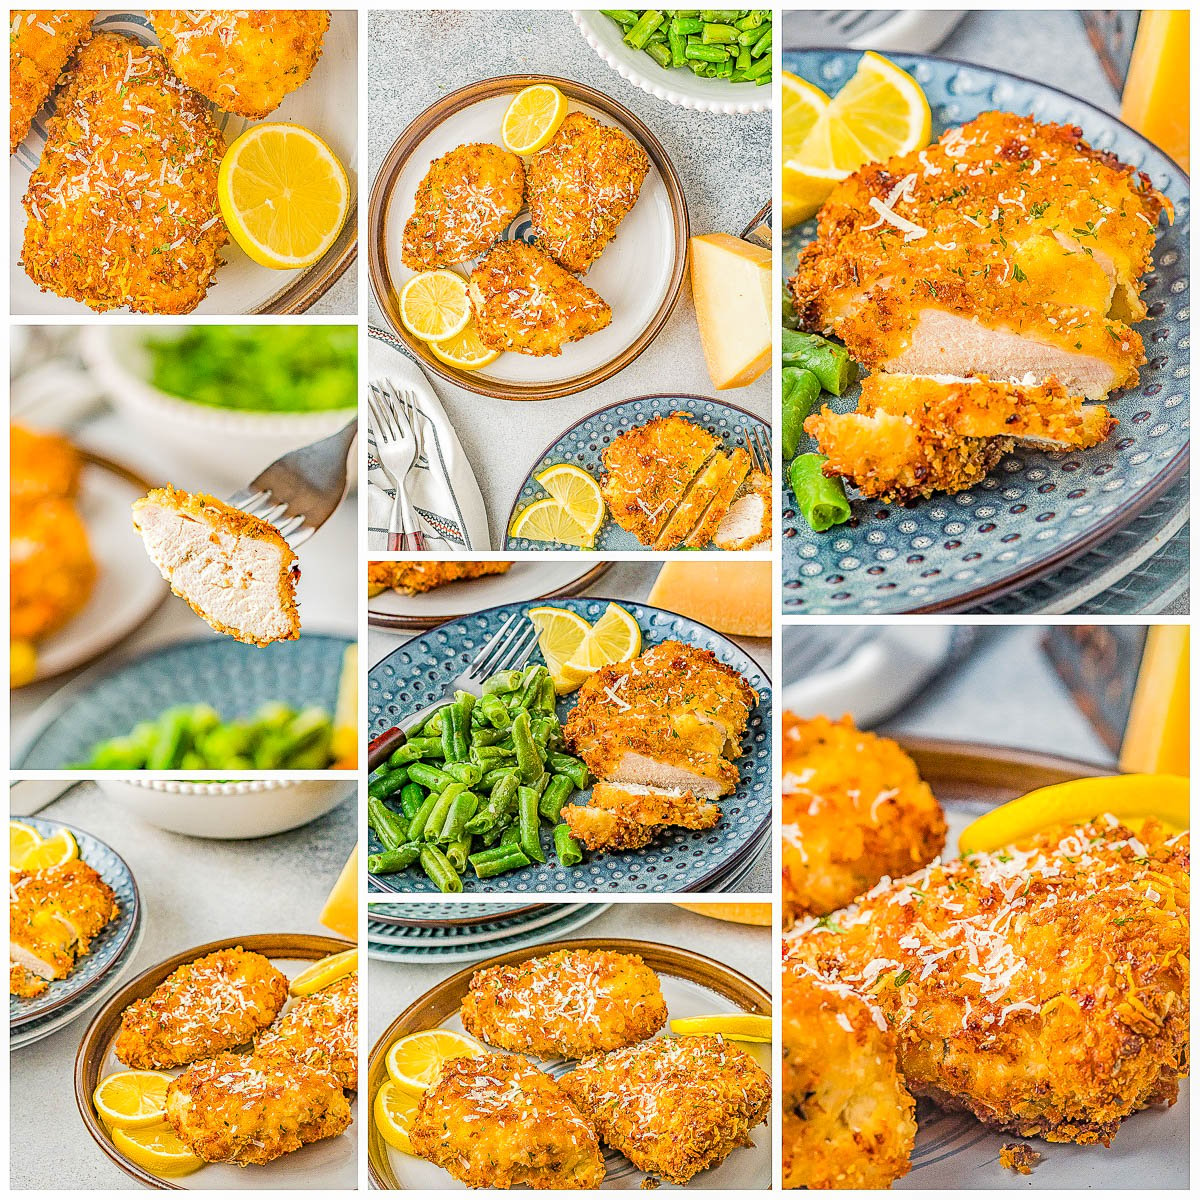 Air Fryer Parmesan Chicken - Coated in a mixture of panko bread crumbs and Parmesan cheese, this "fried" chicken is perfectly crispy on the outside and juicy, tender, and moist inside! It's EASY, ready in 15 minutes, perfect for busy weeknights, and a healthier way to indulge in fried chicken! Oven-baking instructions also provided.